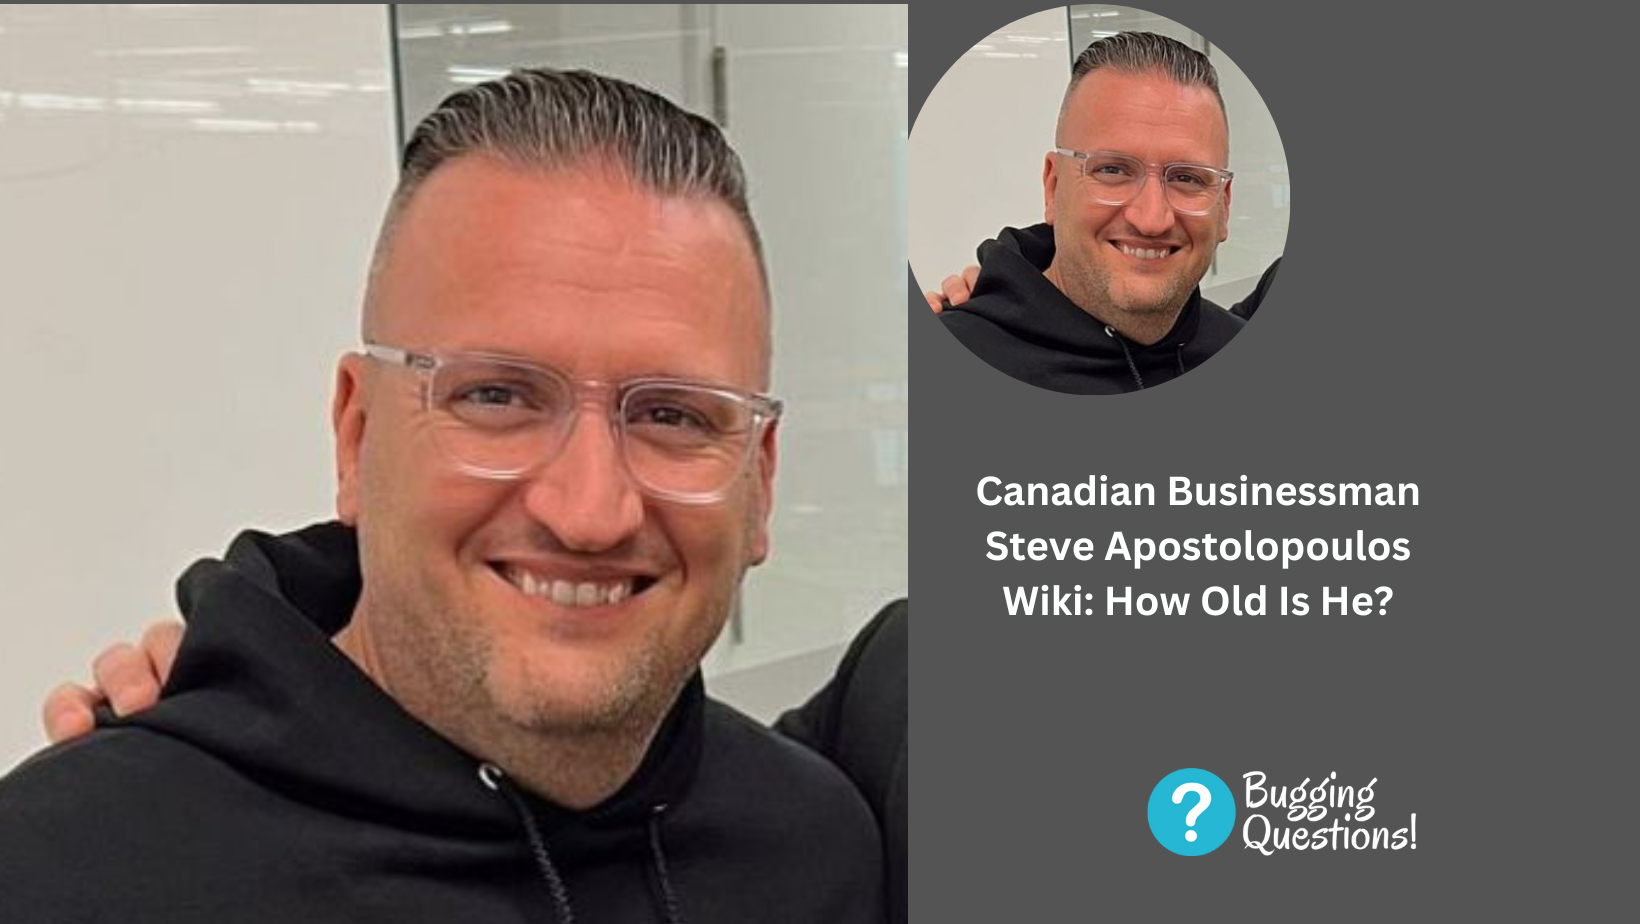 Canadian Businessman Steve Apostolopoulos Wiki: How Old Is He?